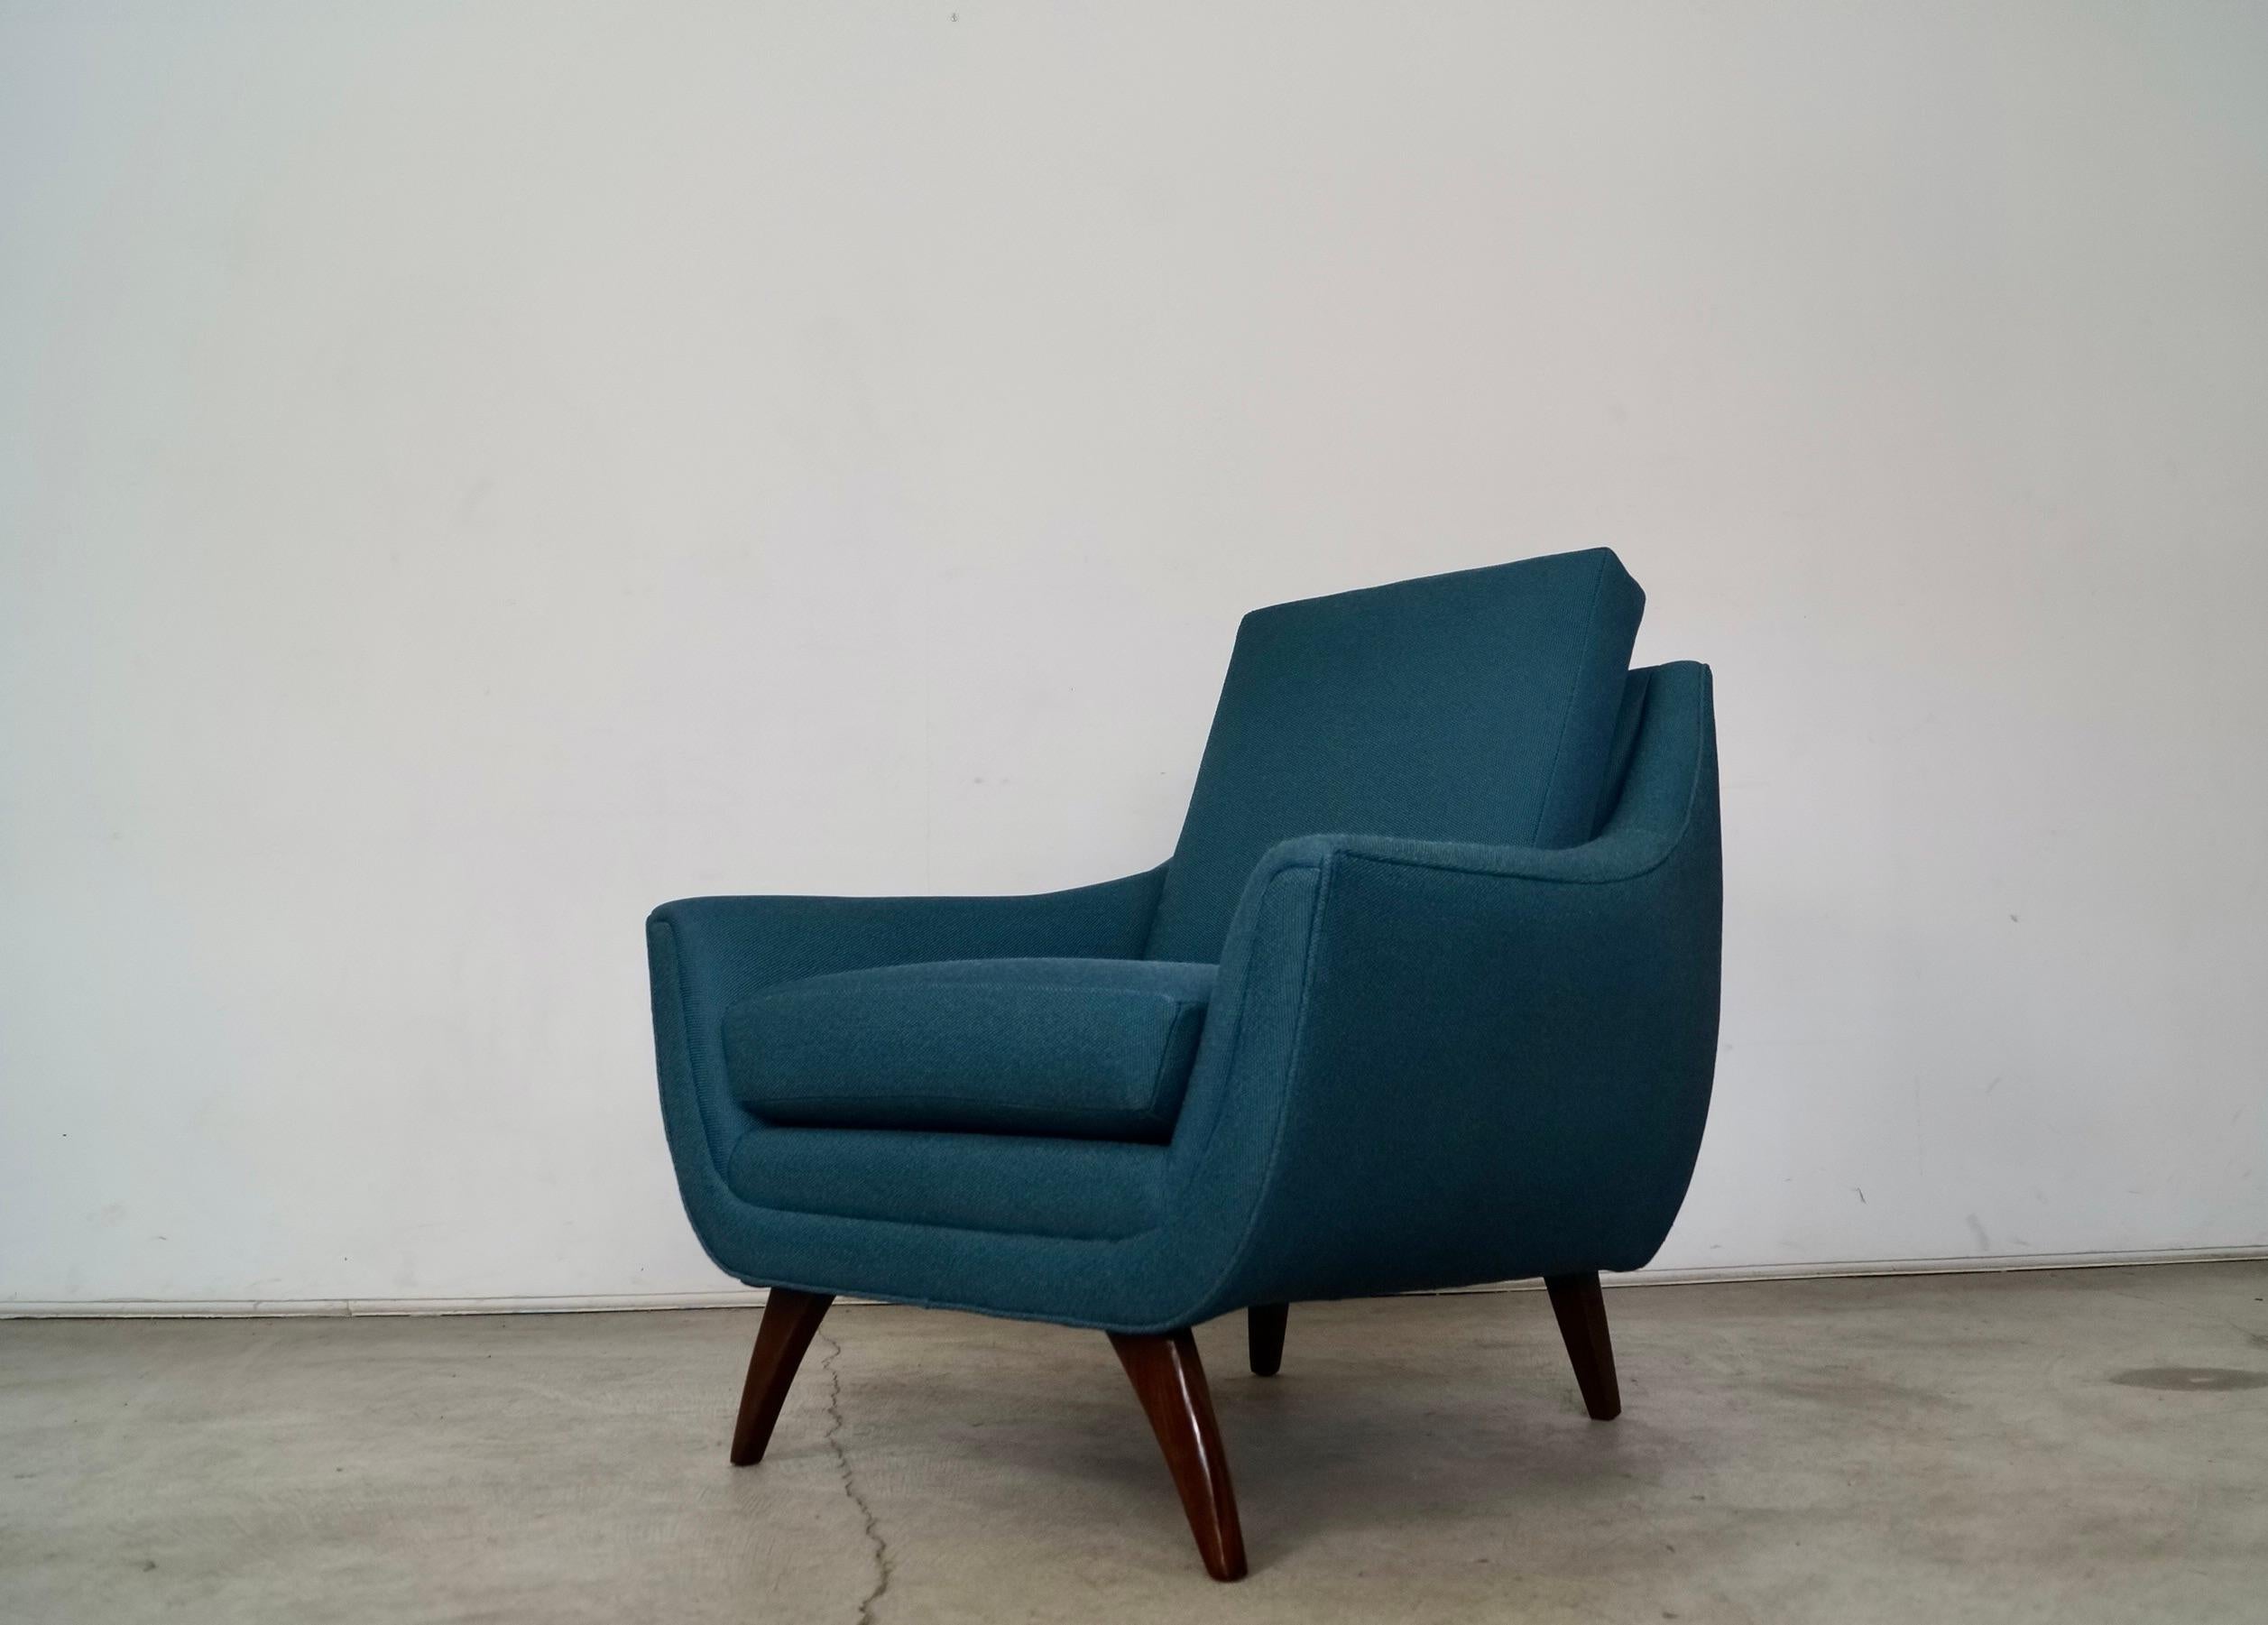 Mid-20th Century 1960's Mid-Century Modern Adrian Pearsall Style Prestige Gondola Lounge Chair For Sale